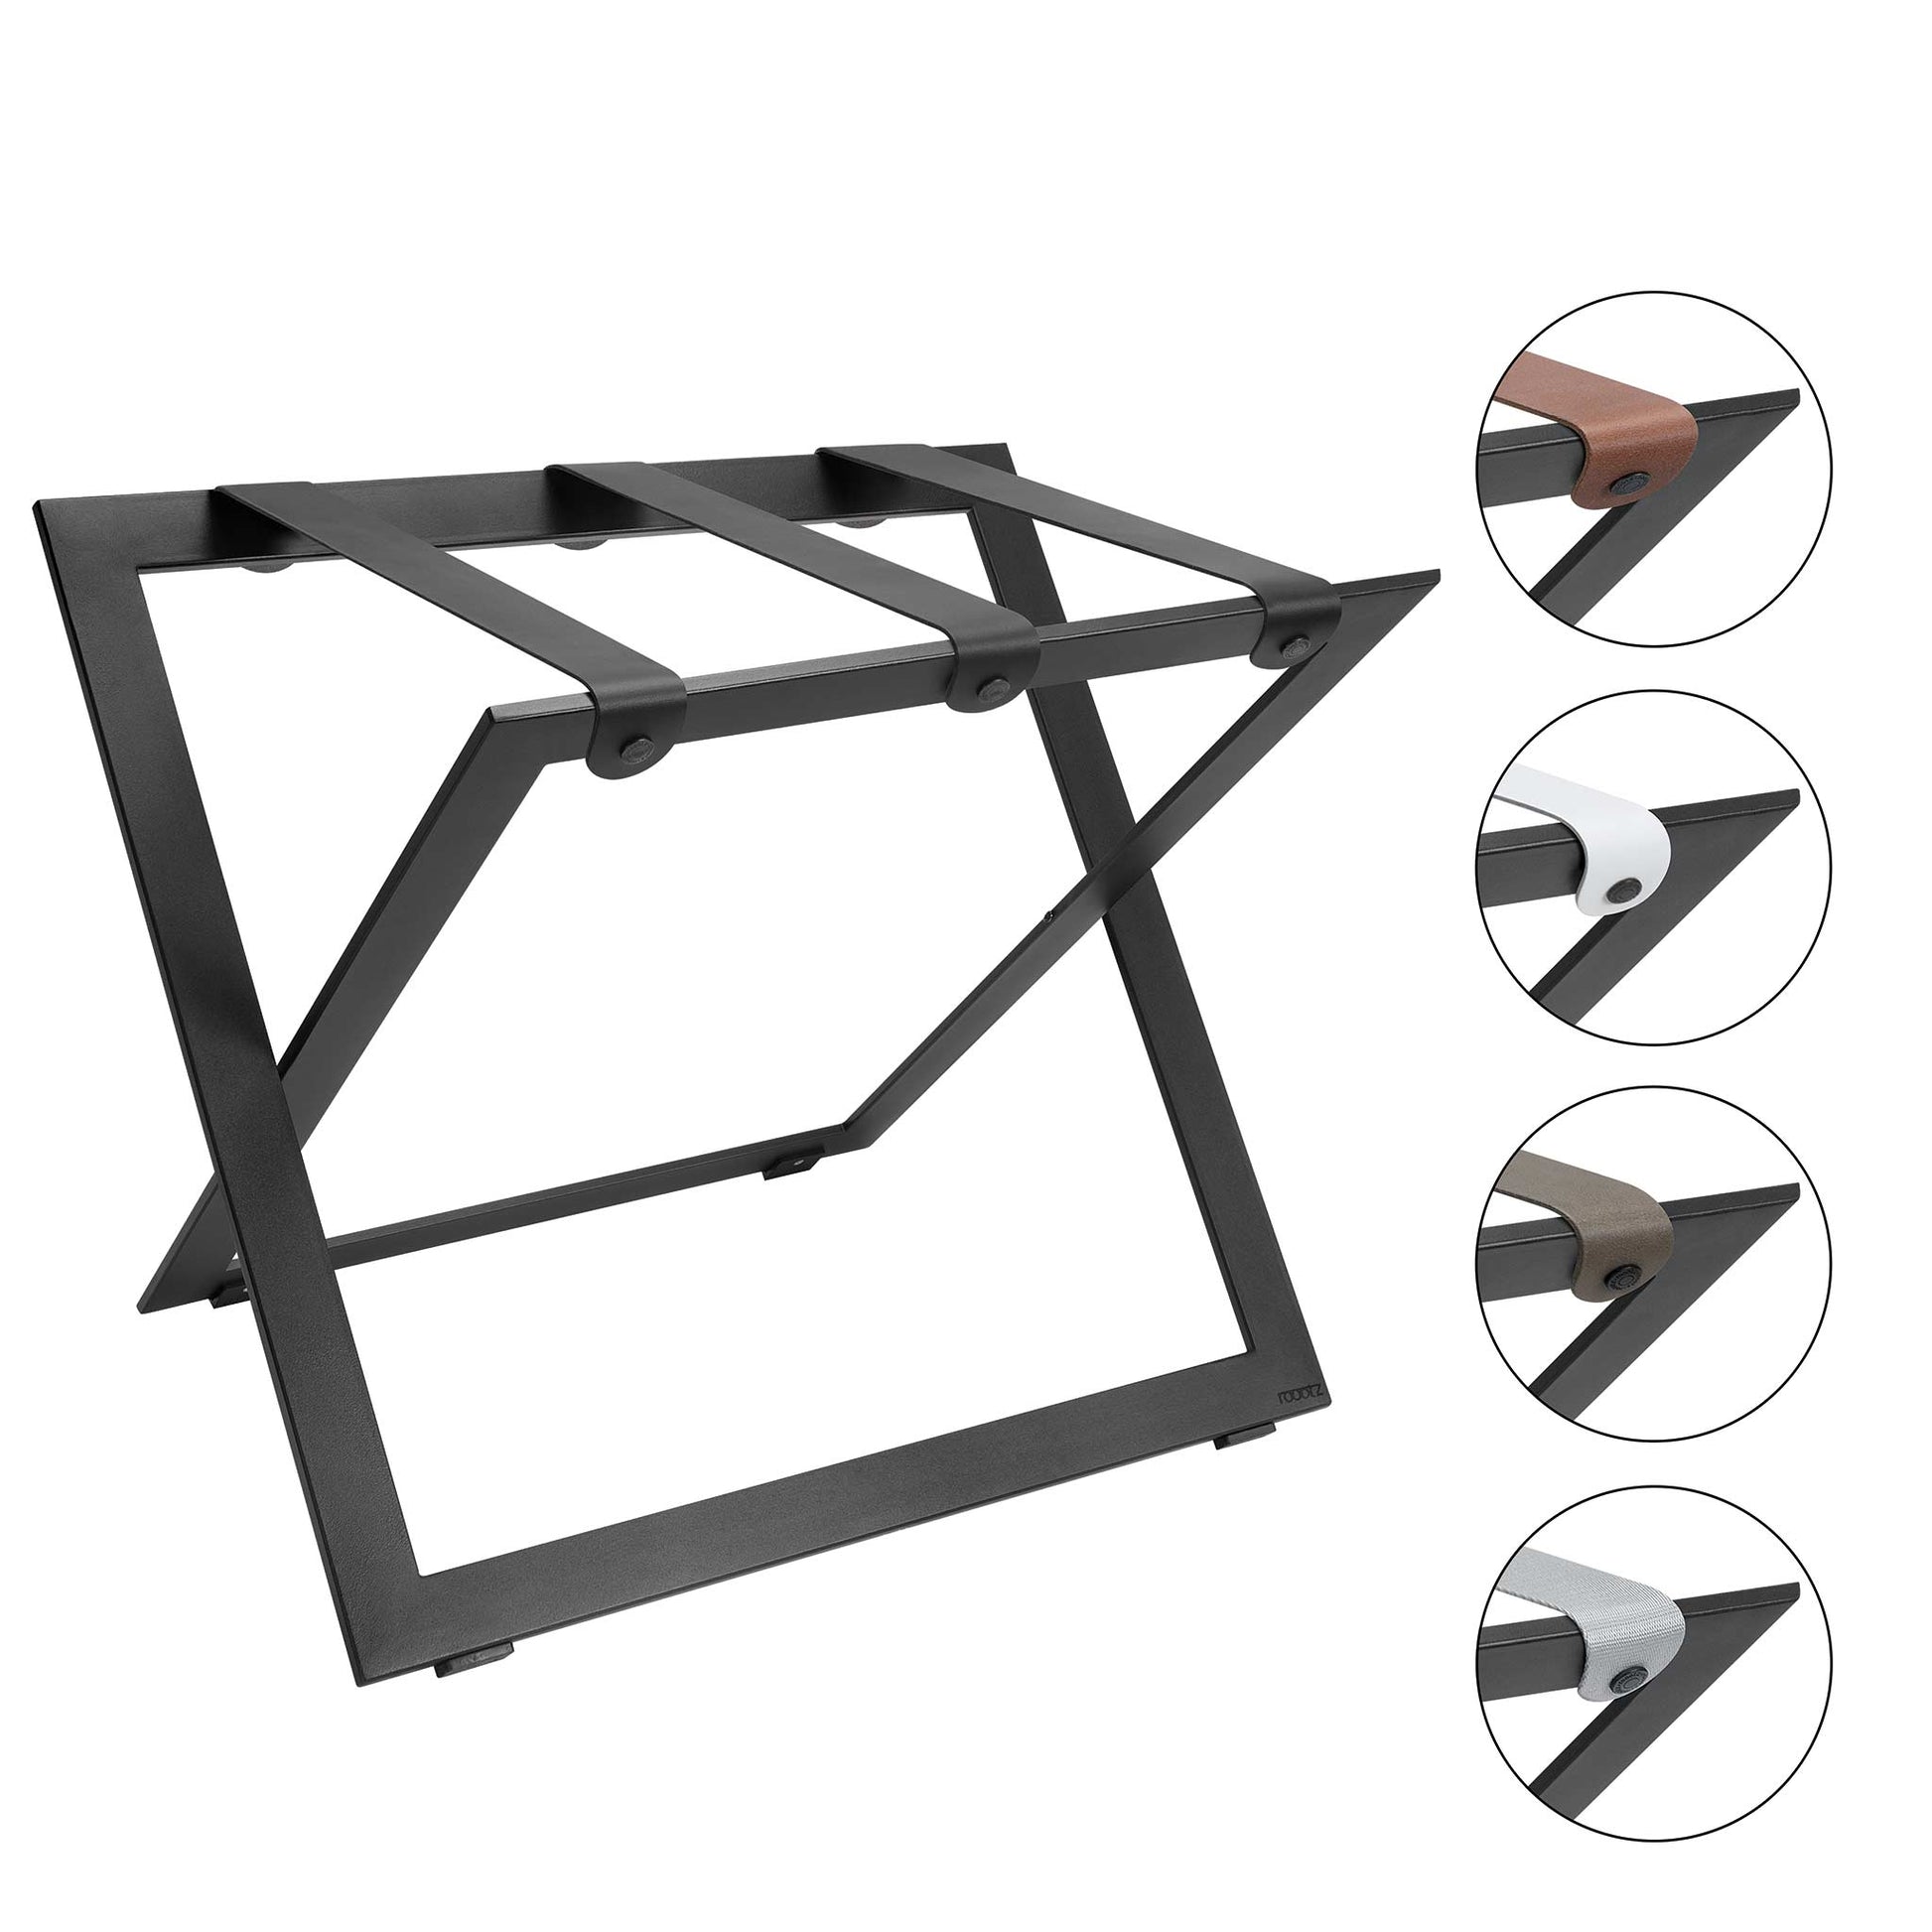 Roootz black steel compact hotel luggage rack with a variety of coloured leather straps